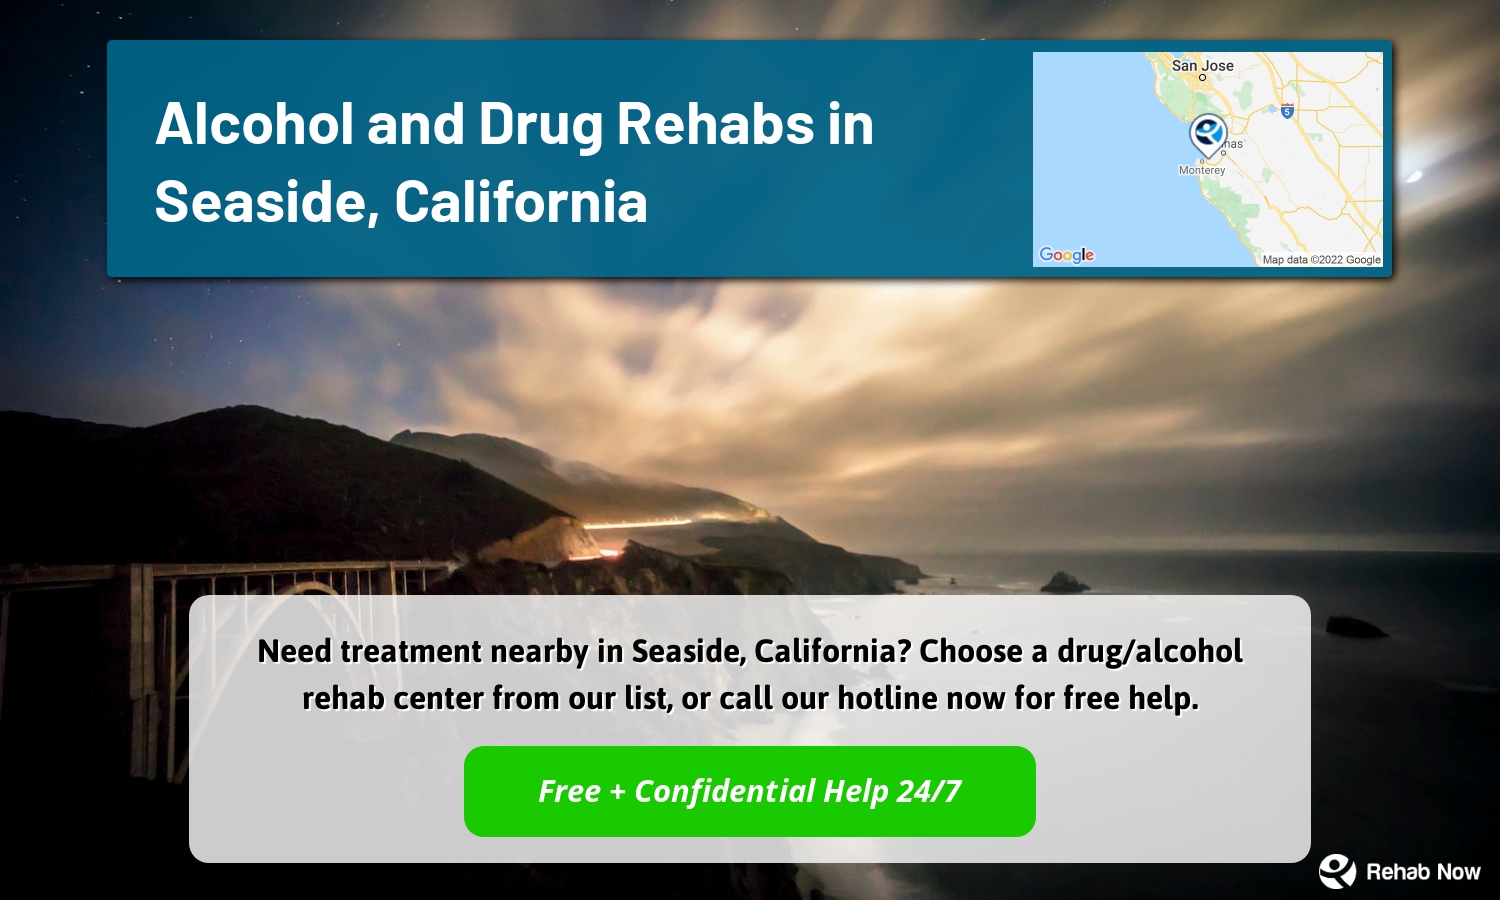 Need treatment nearby in Seaside, California? Choose a drug/alcohol rehab center from our list, or call our hotline now for free help.